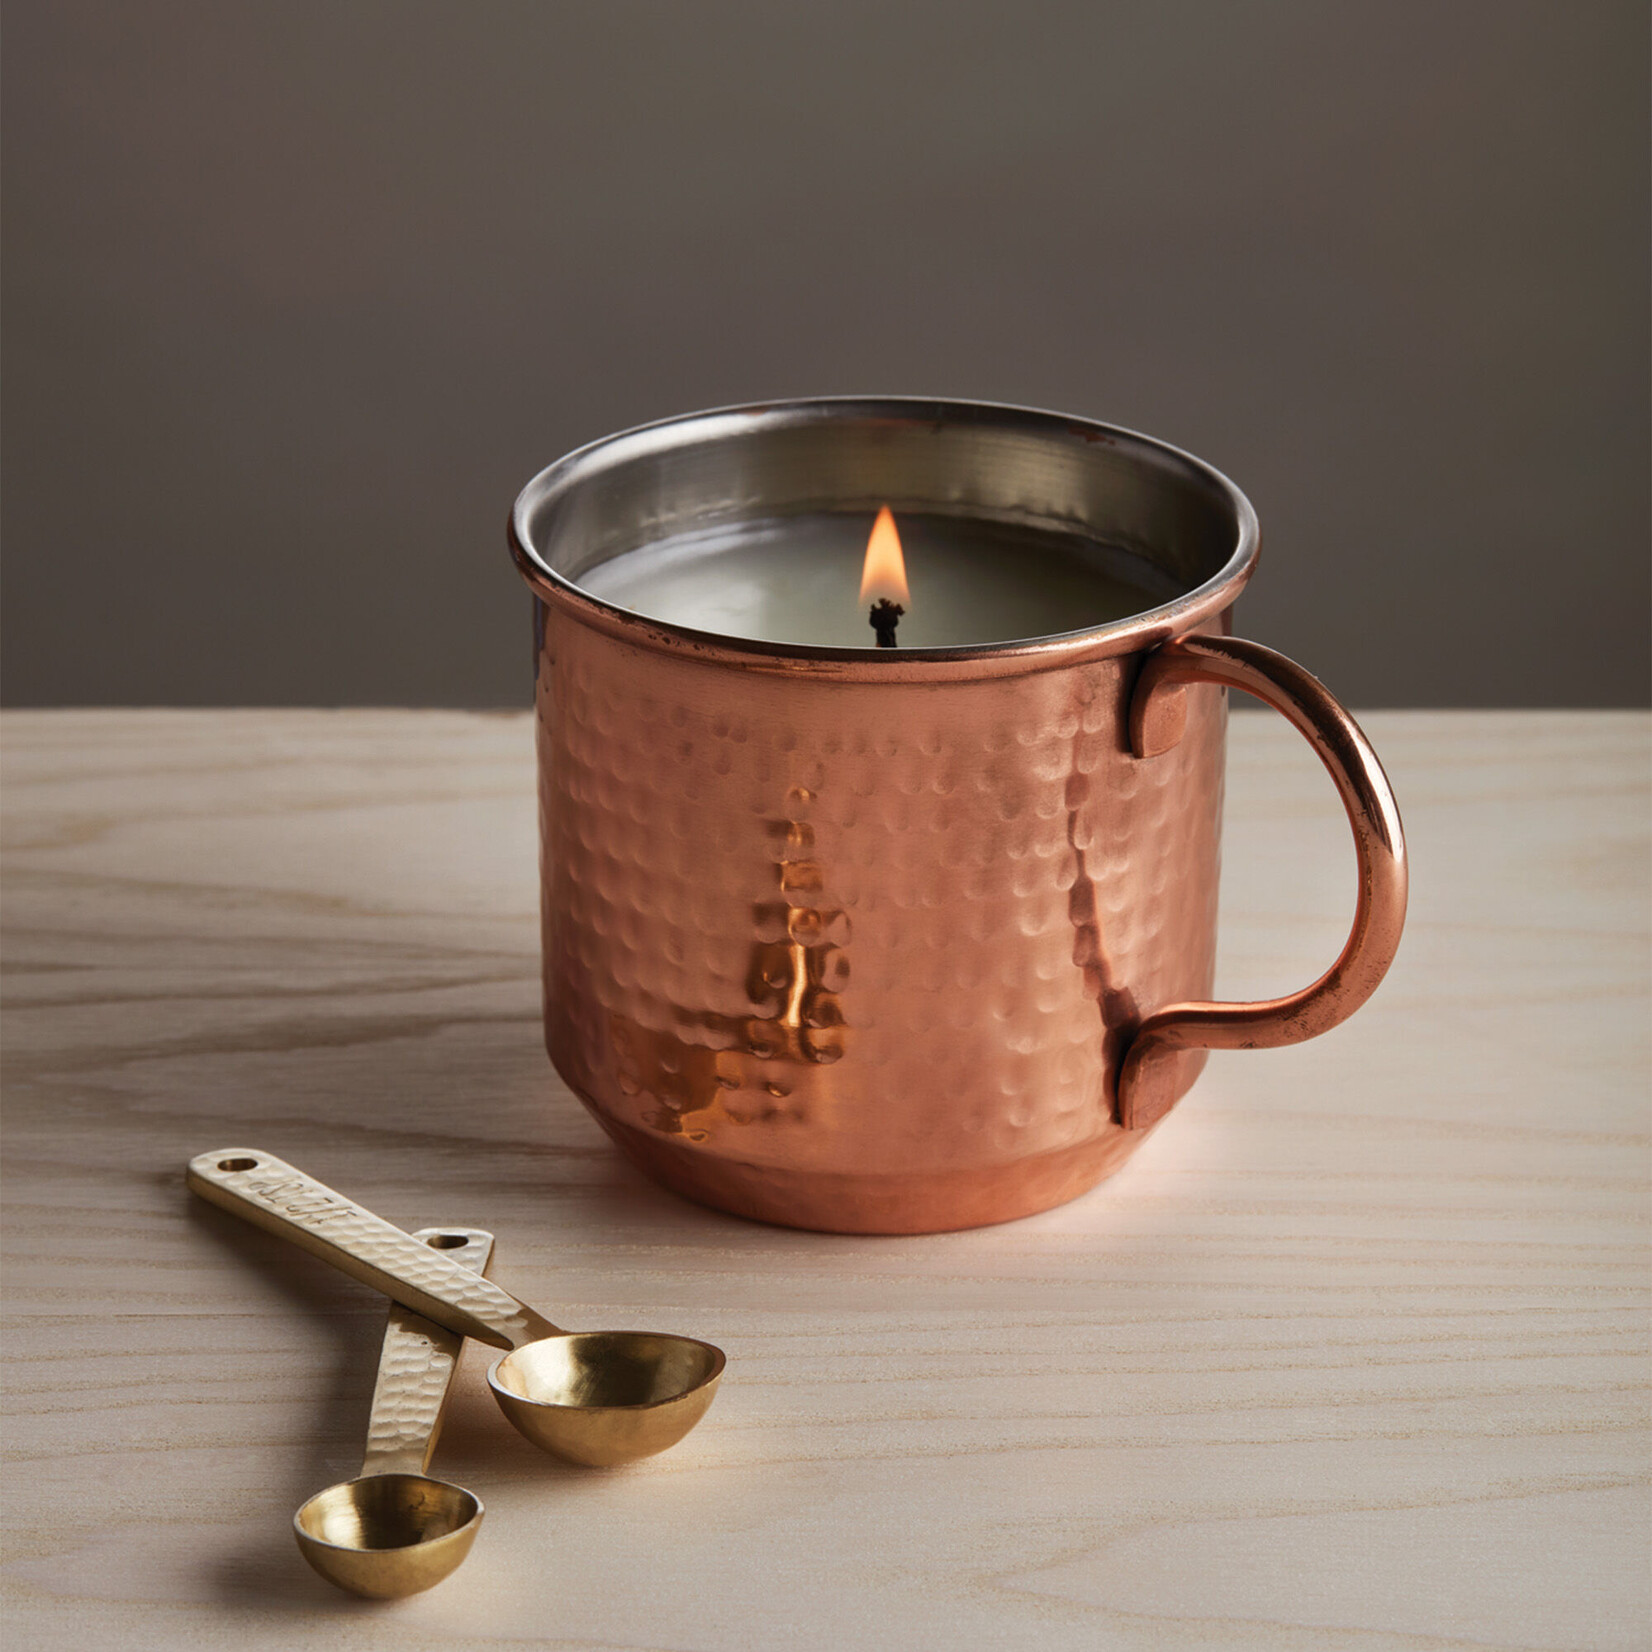 Thymes Simmered Cider in a Copper Mug